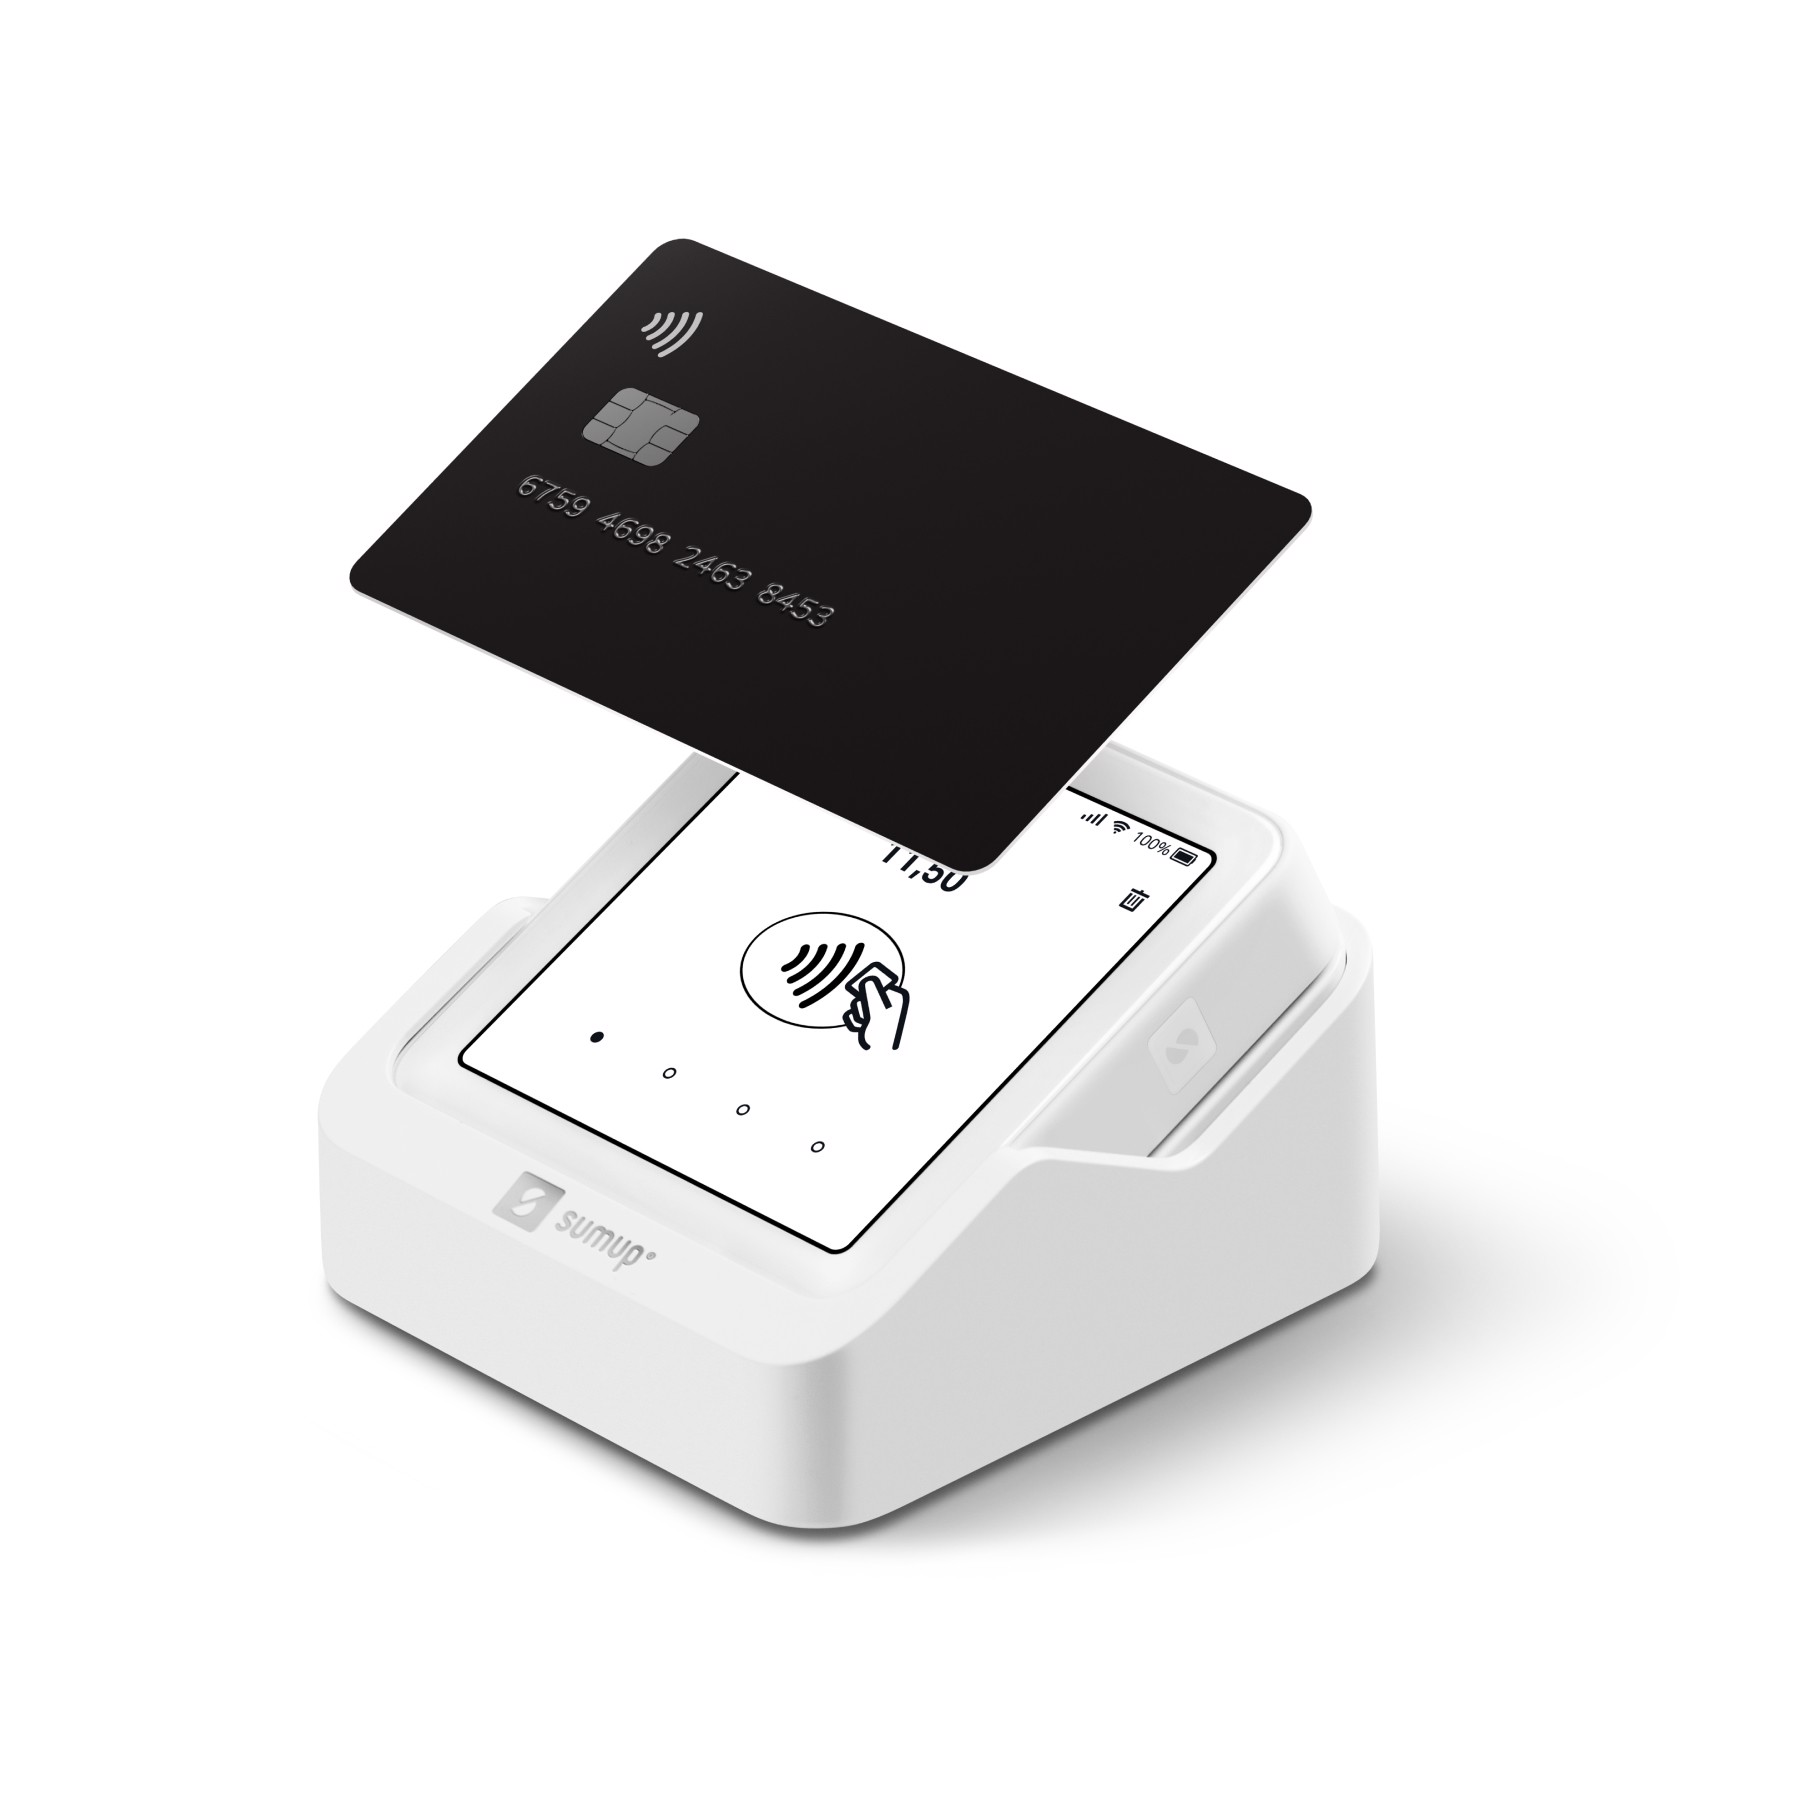 SUMUP Solo lettore di card readers Bianco, Mobile Pos in Offerta su Stay  On